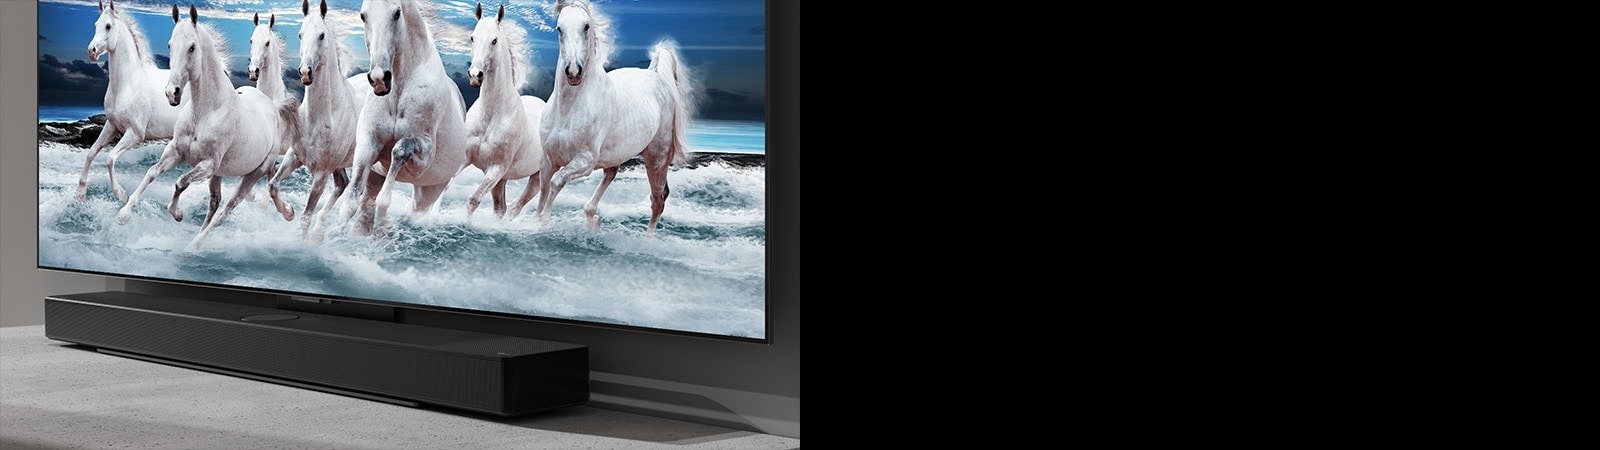 Soundbar  and TV are placed on the white table and 7 white horses are shown on the TV.